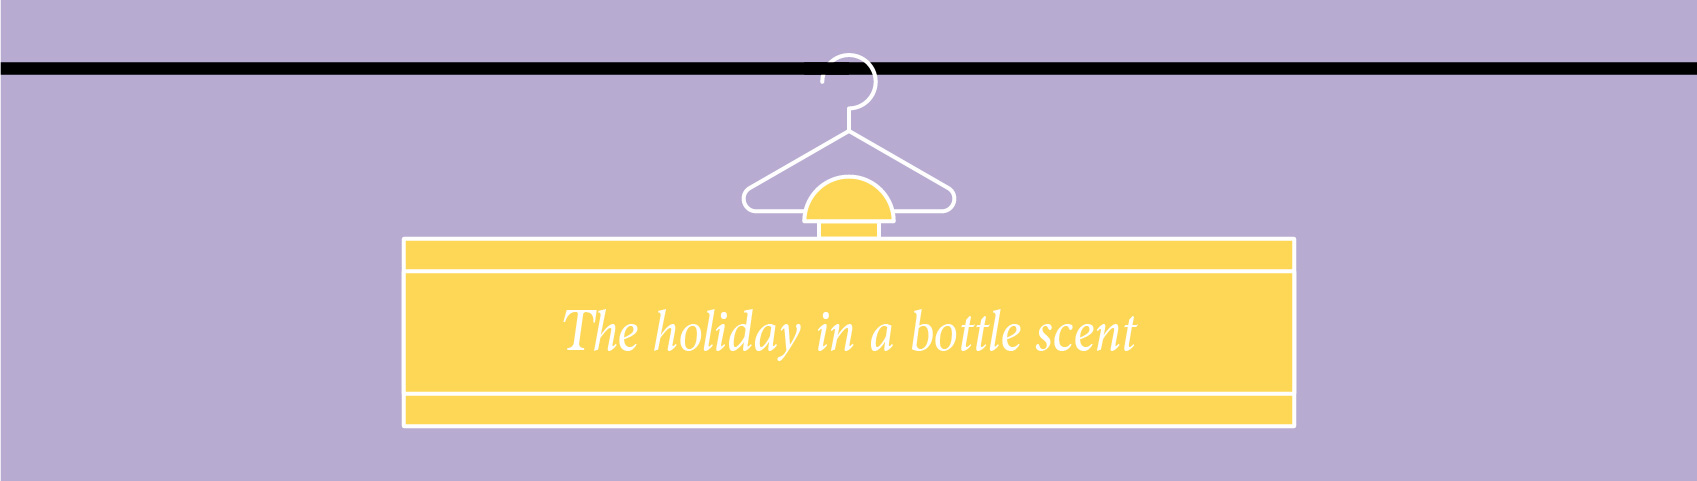 illustration of perfume bottle on a coat hanger the holiday in a bottle scent